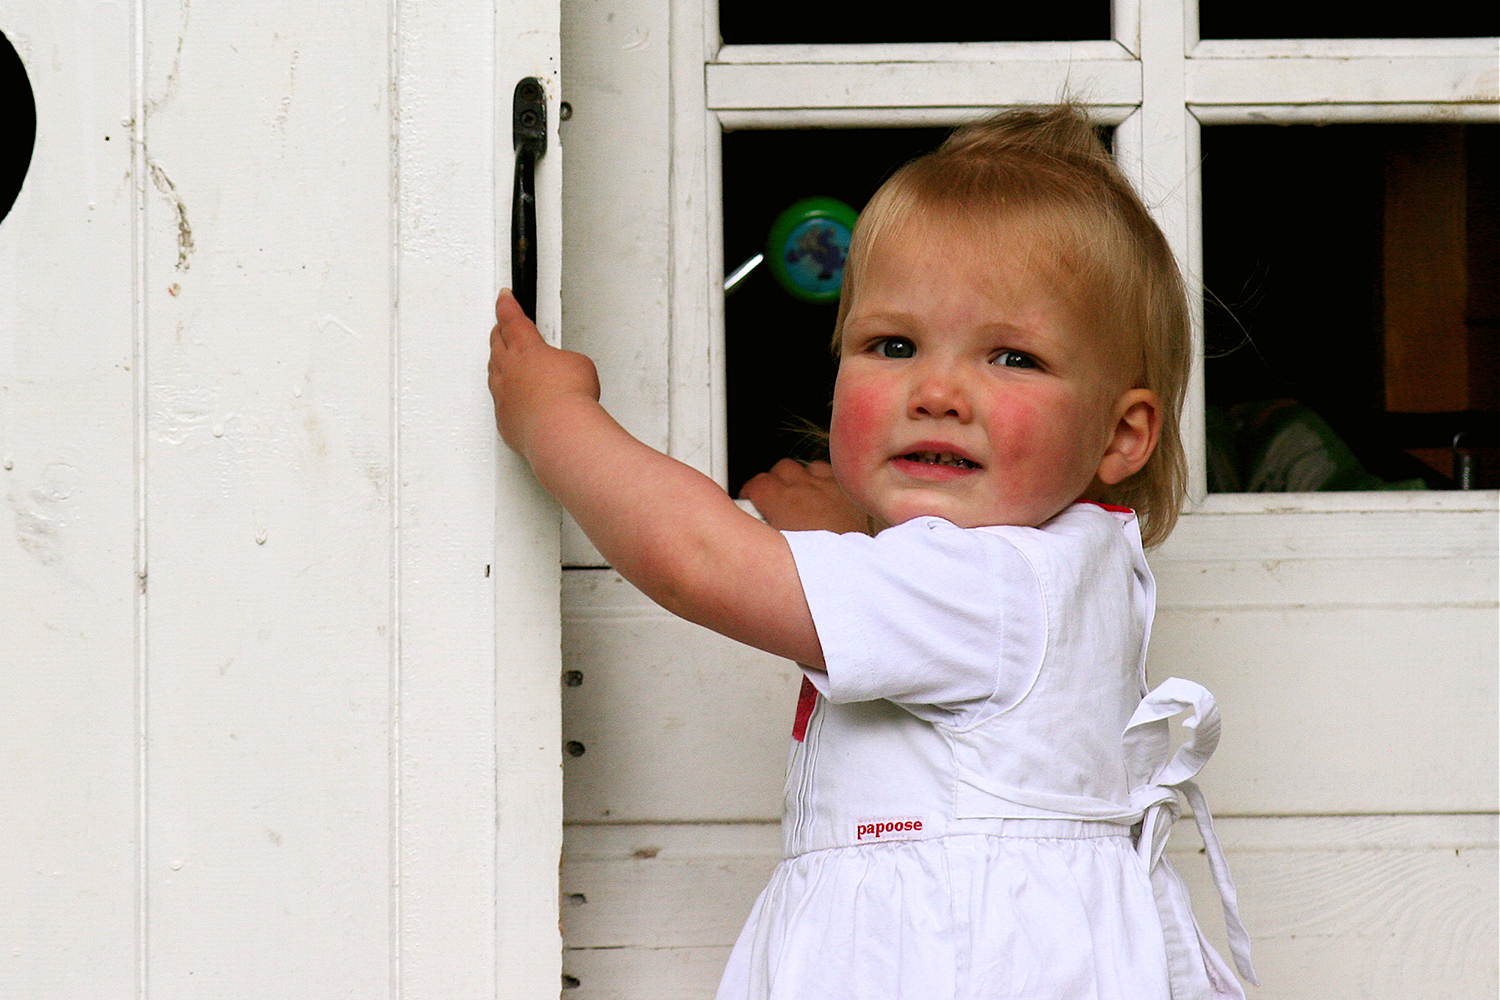 Pretty little blonde girl in a white dress opening the door of a white shed